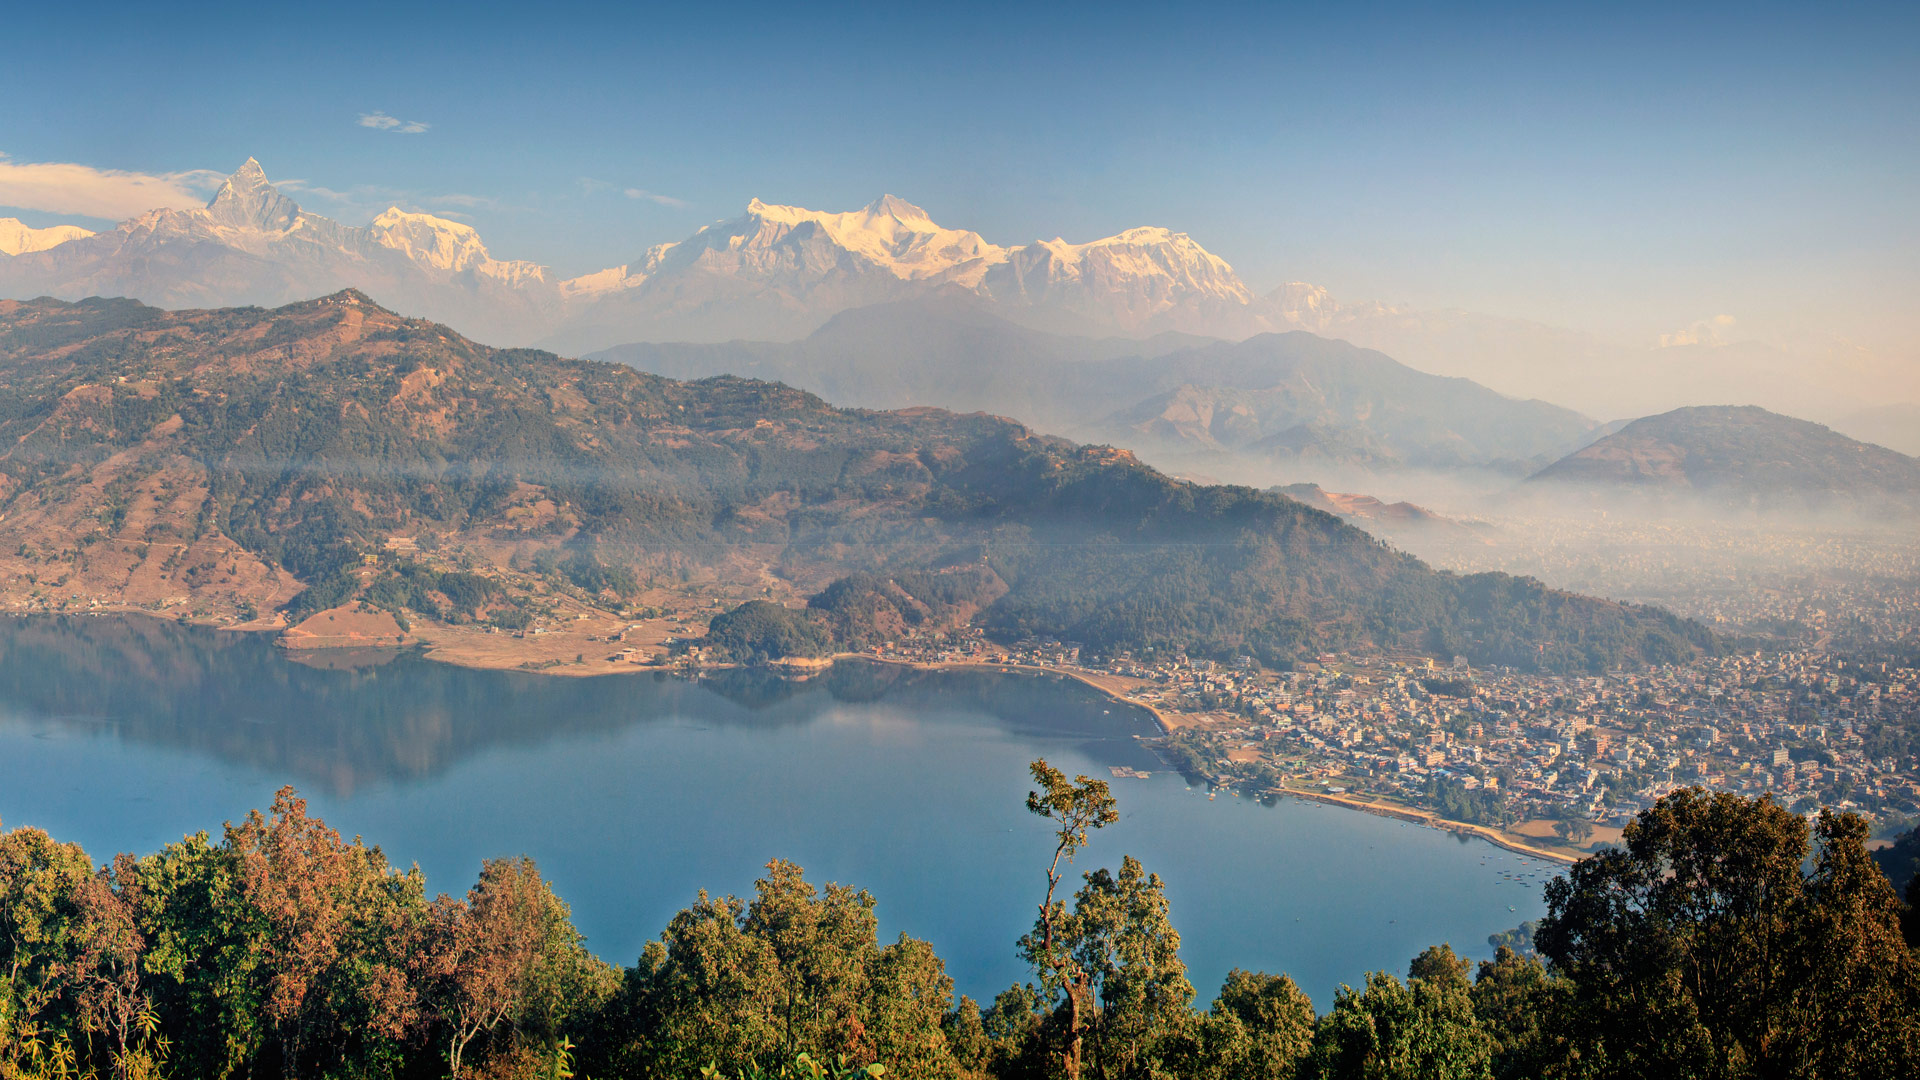 Hiking In Nepal | Tours of Nepal and Chitwan National Park